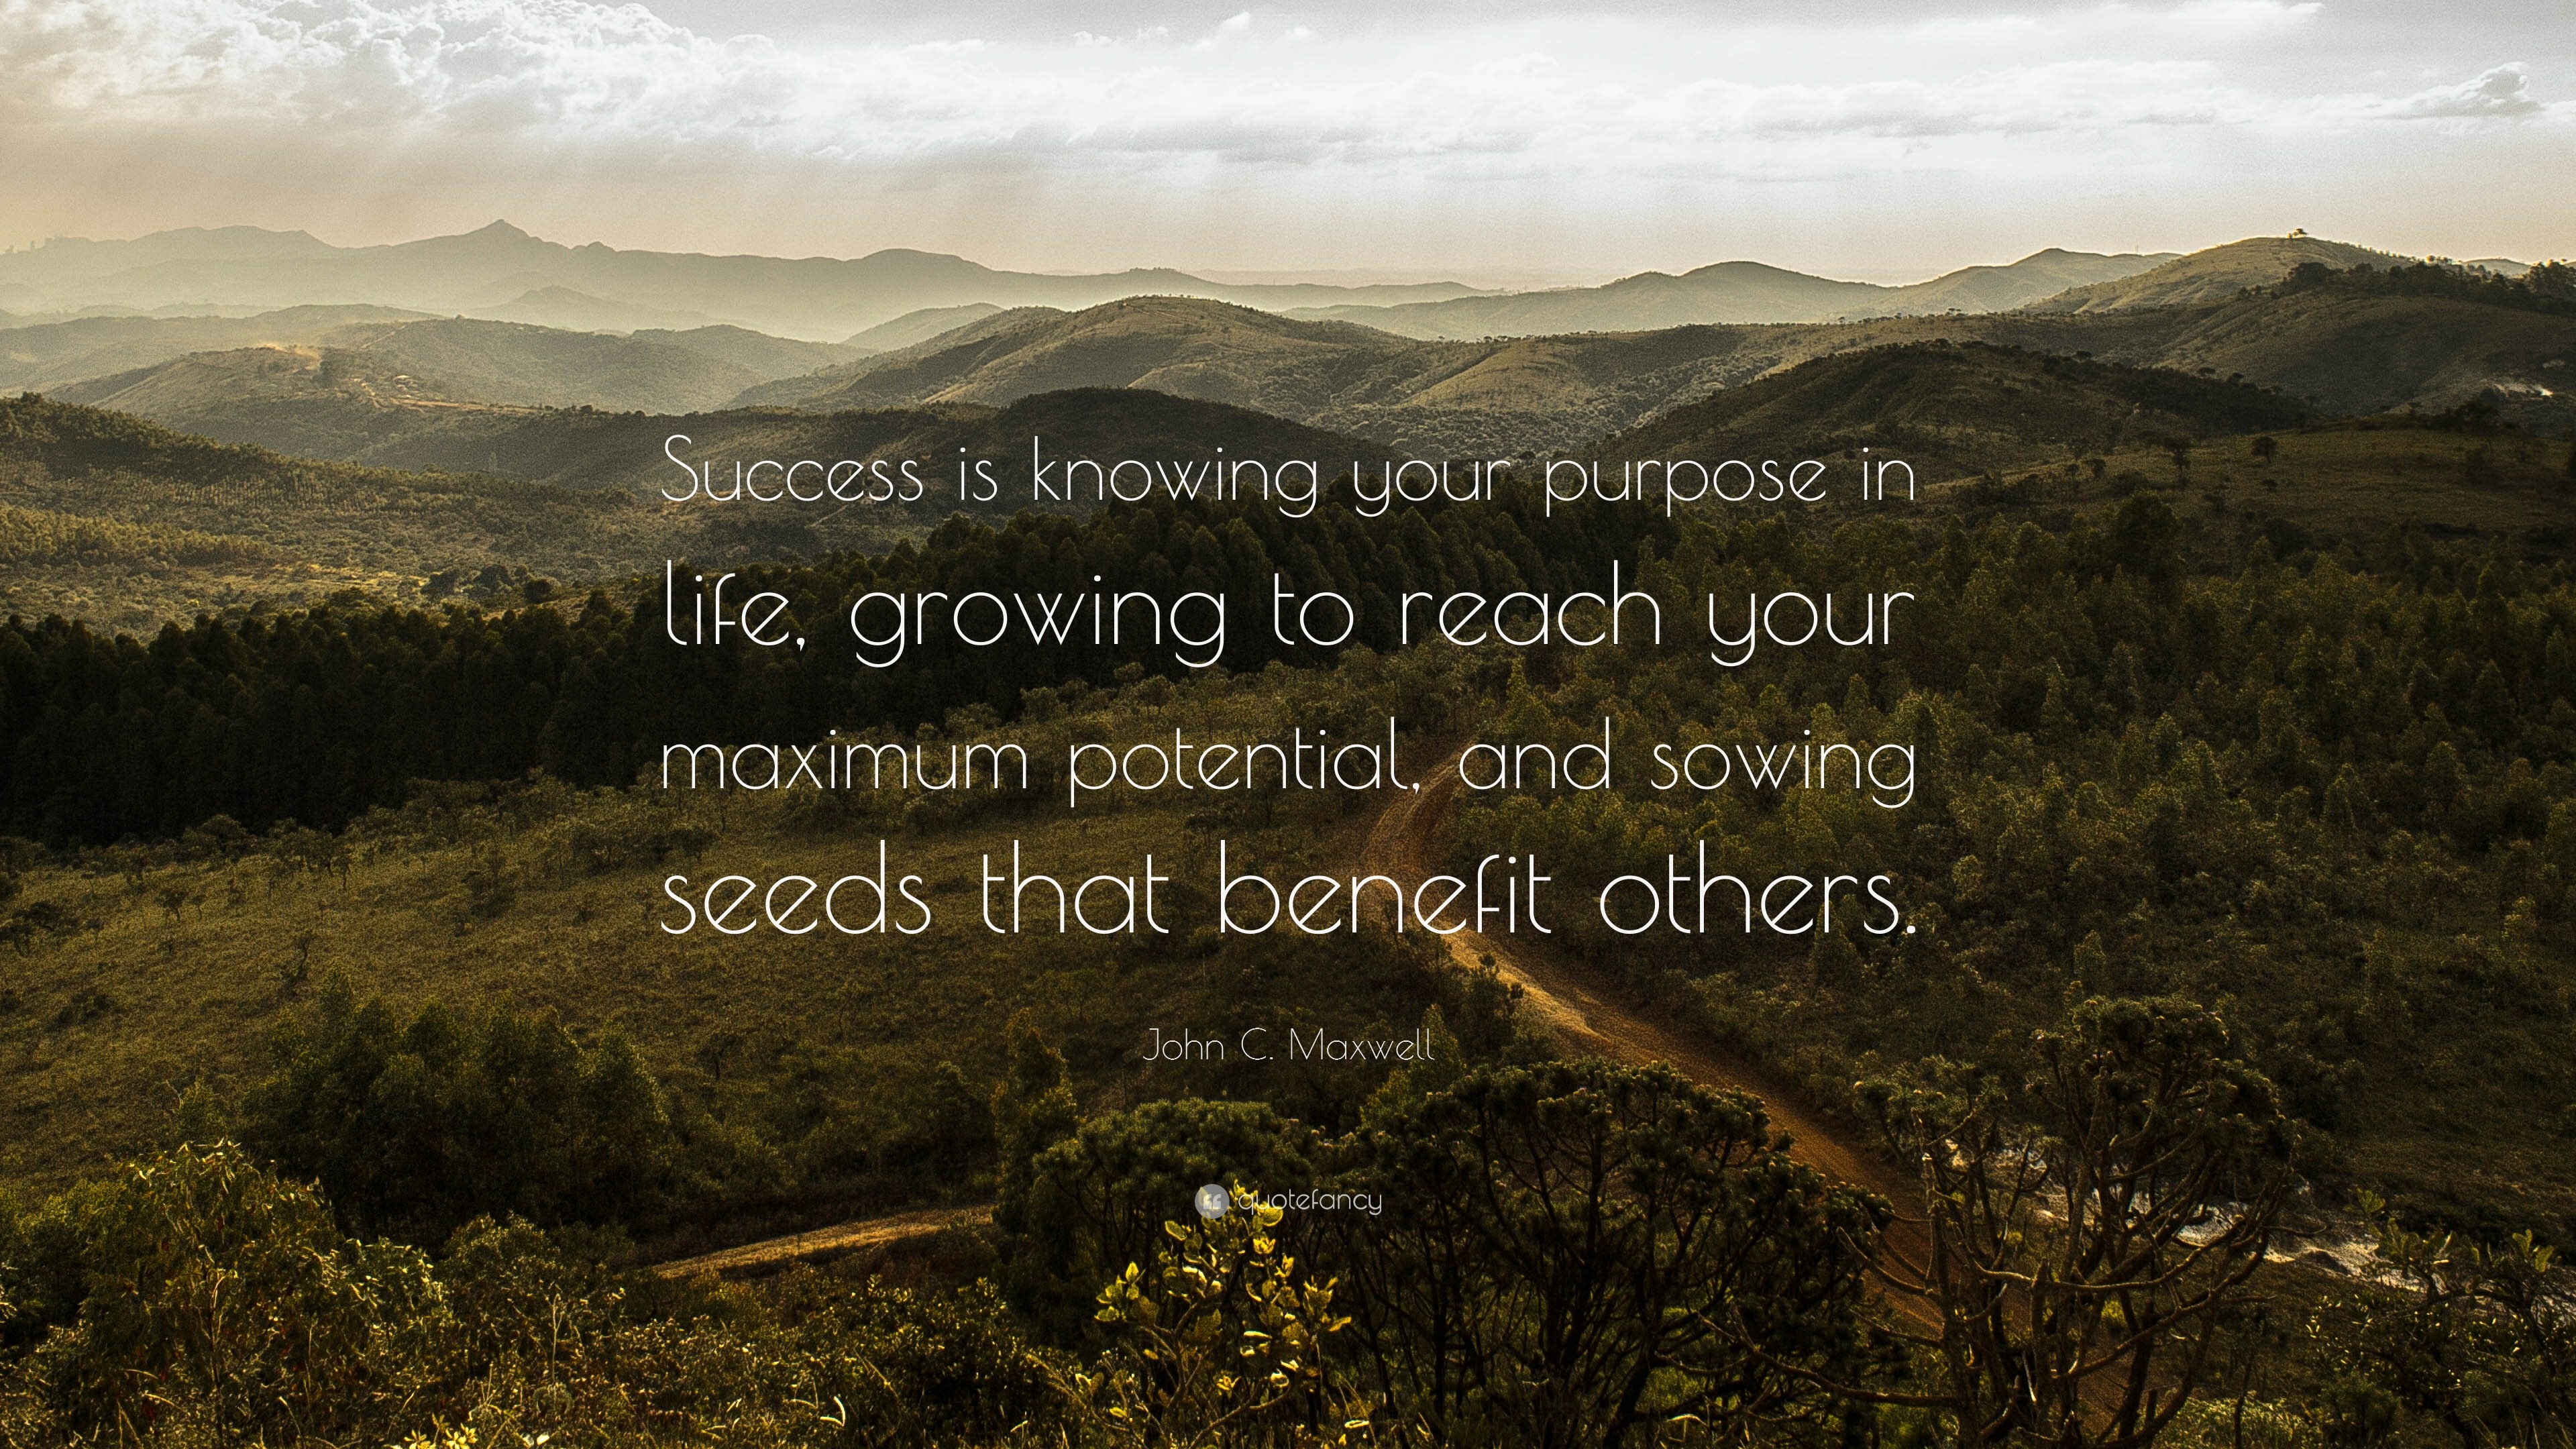 John C Maxwell Quote “Success is knowing your purpose in life growing